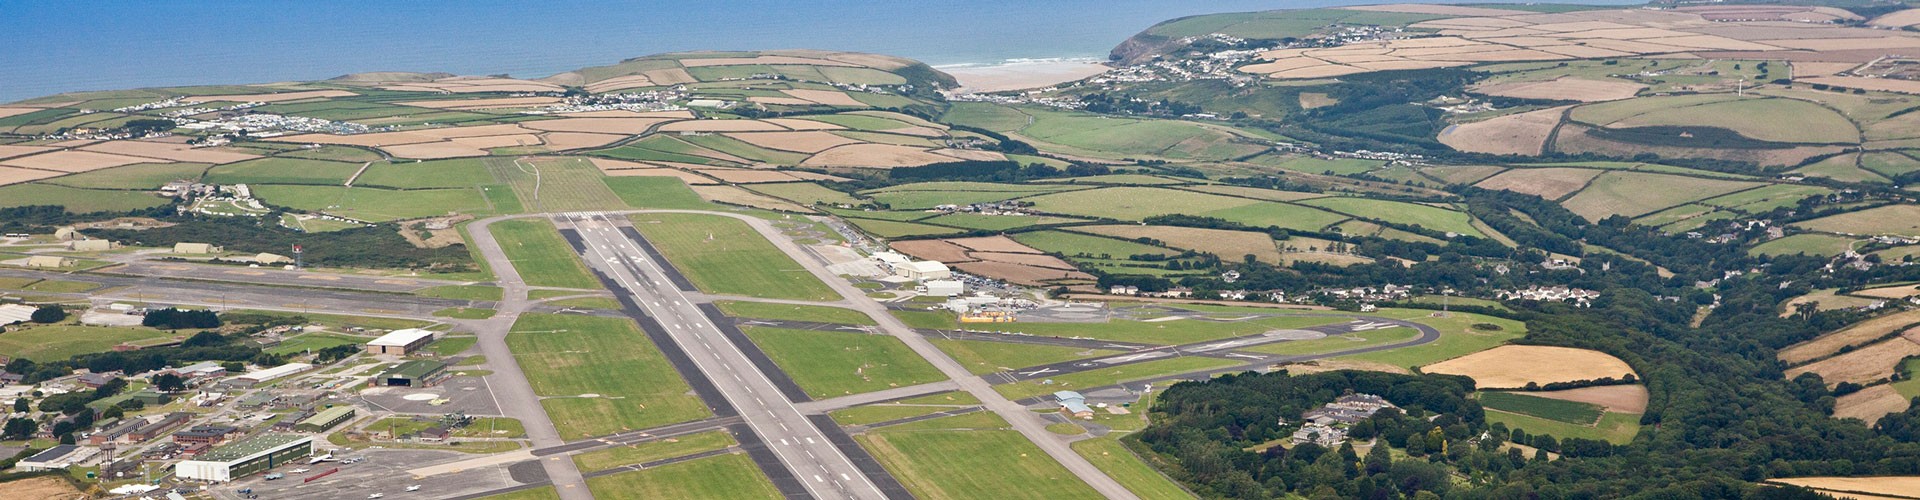 runway at Cornwall airport with sea in background